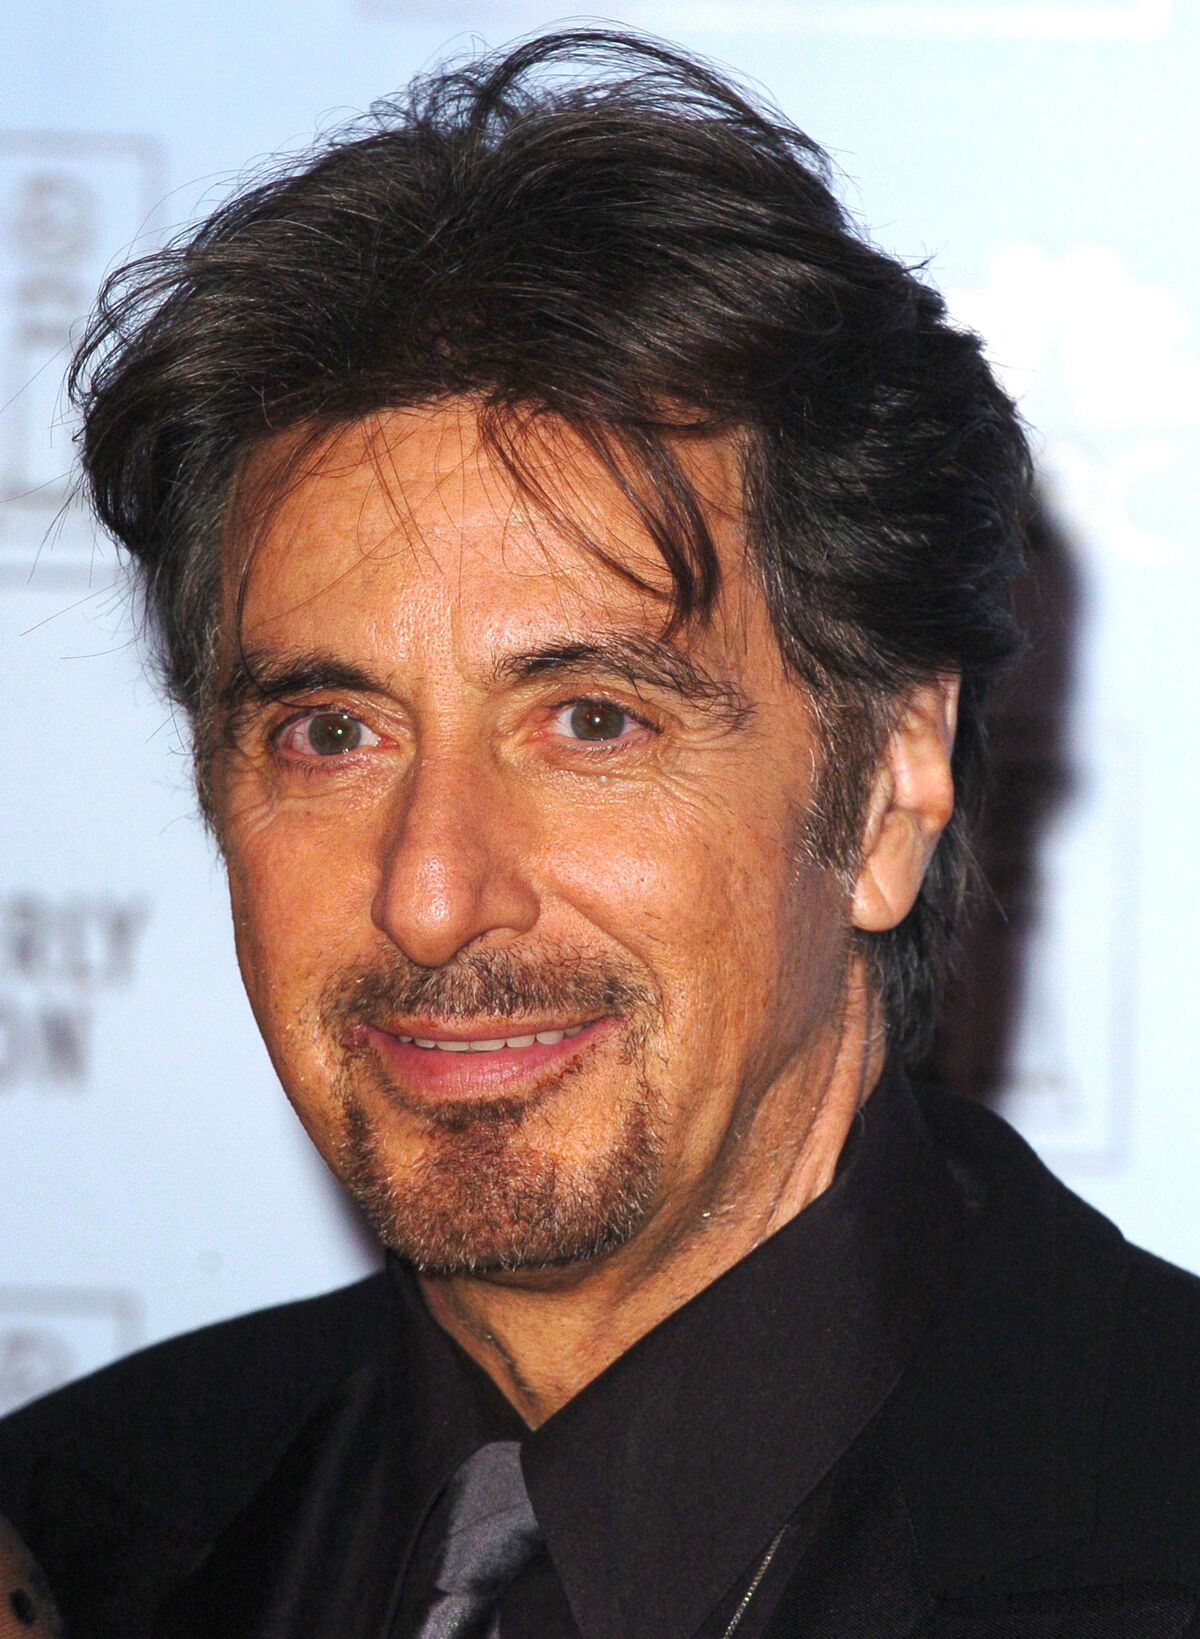 List of awards and nominations received by Al Pacino - Wikipedia